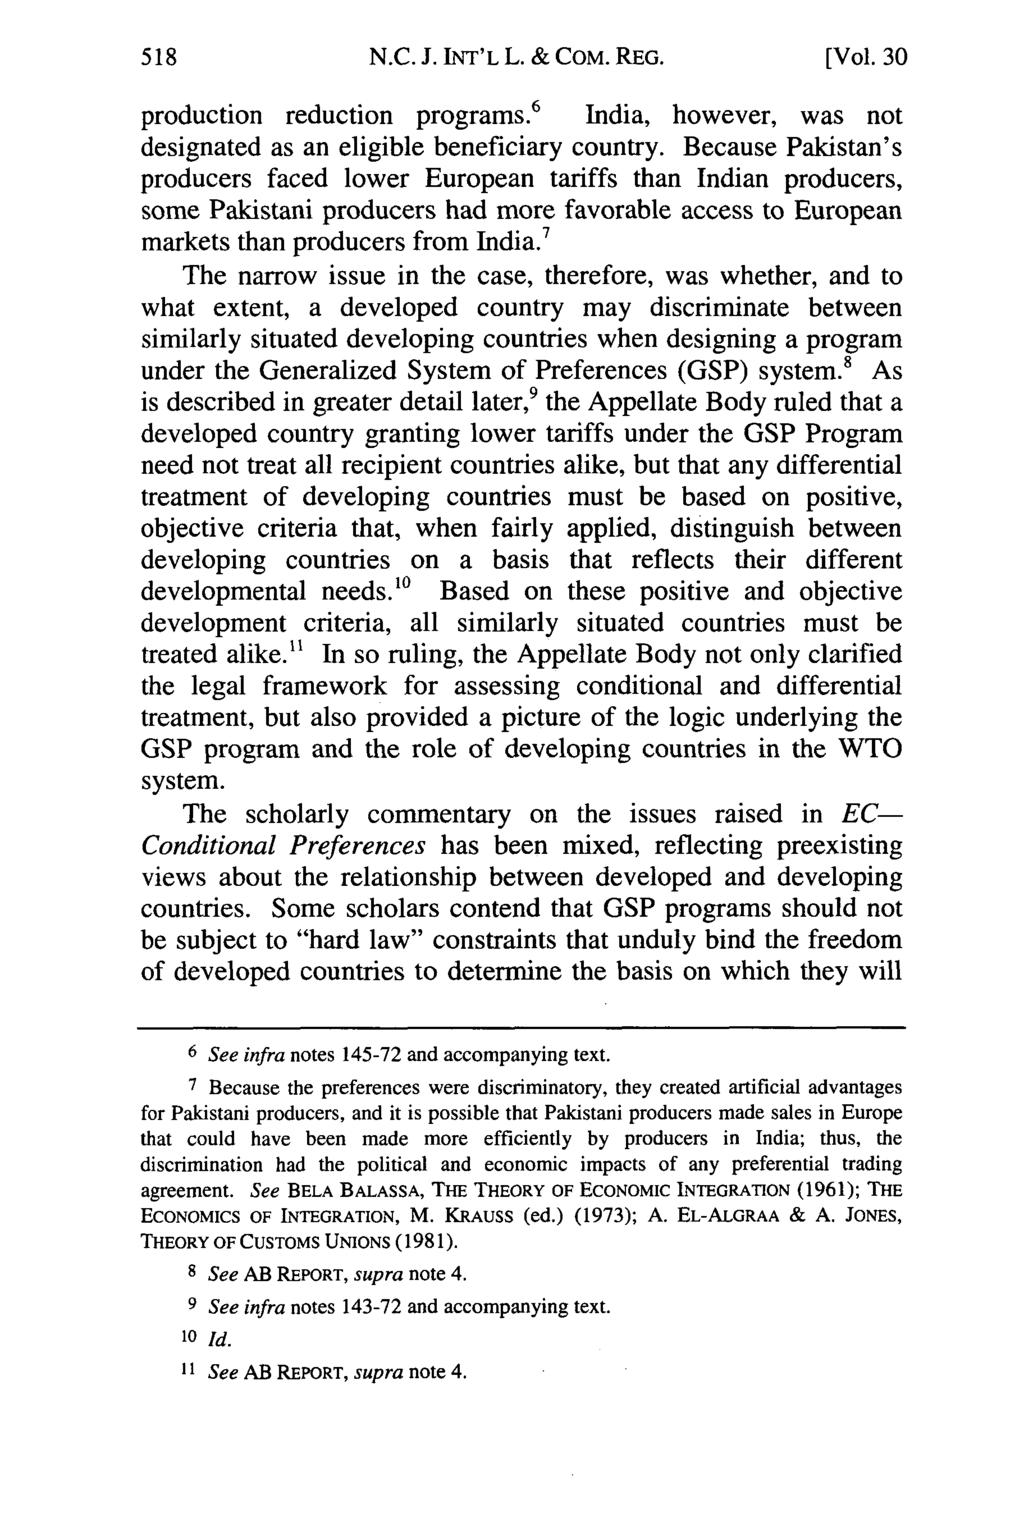 N.C. J. INT'L L. & COM. REG. [Vol. 30 6 production reduction programs. India, however, was not designated as an eligible beneficiary country.